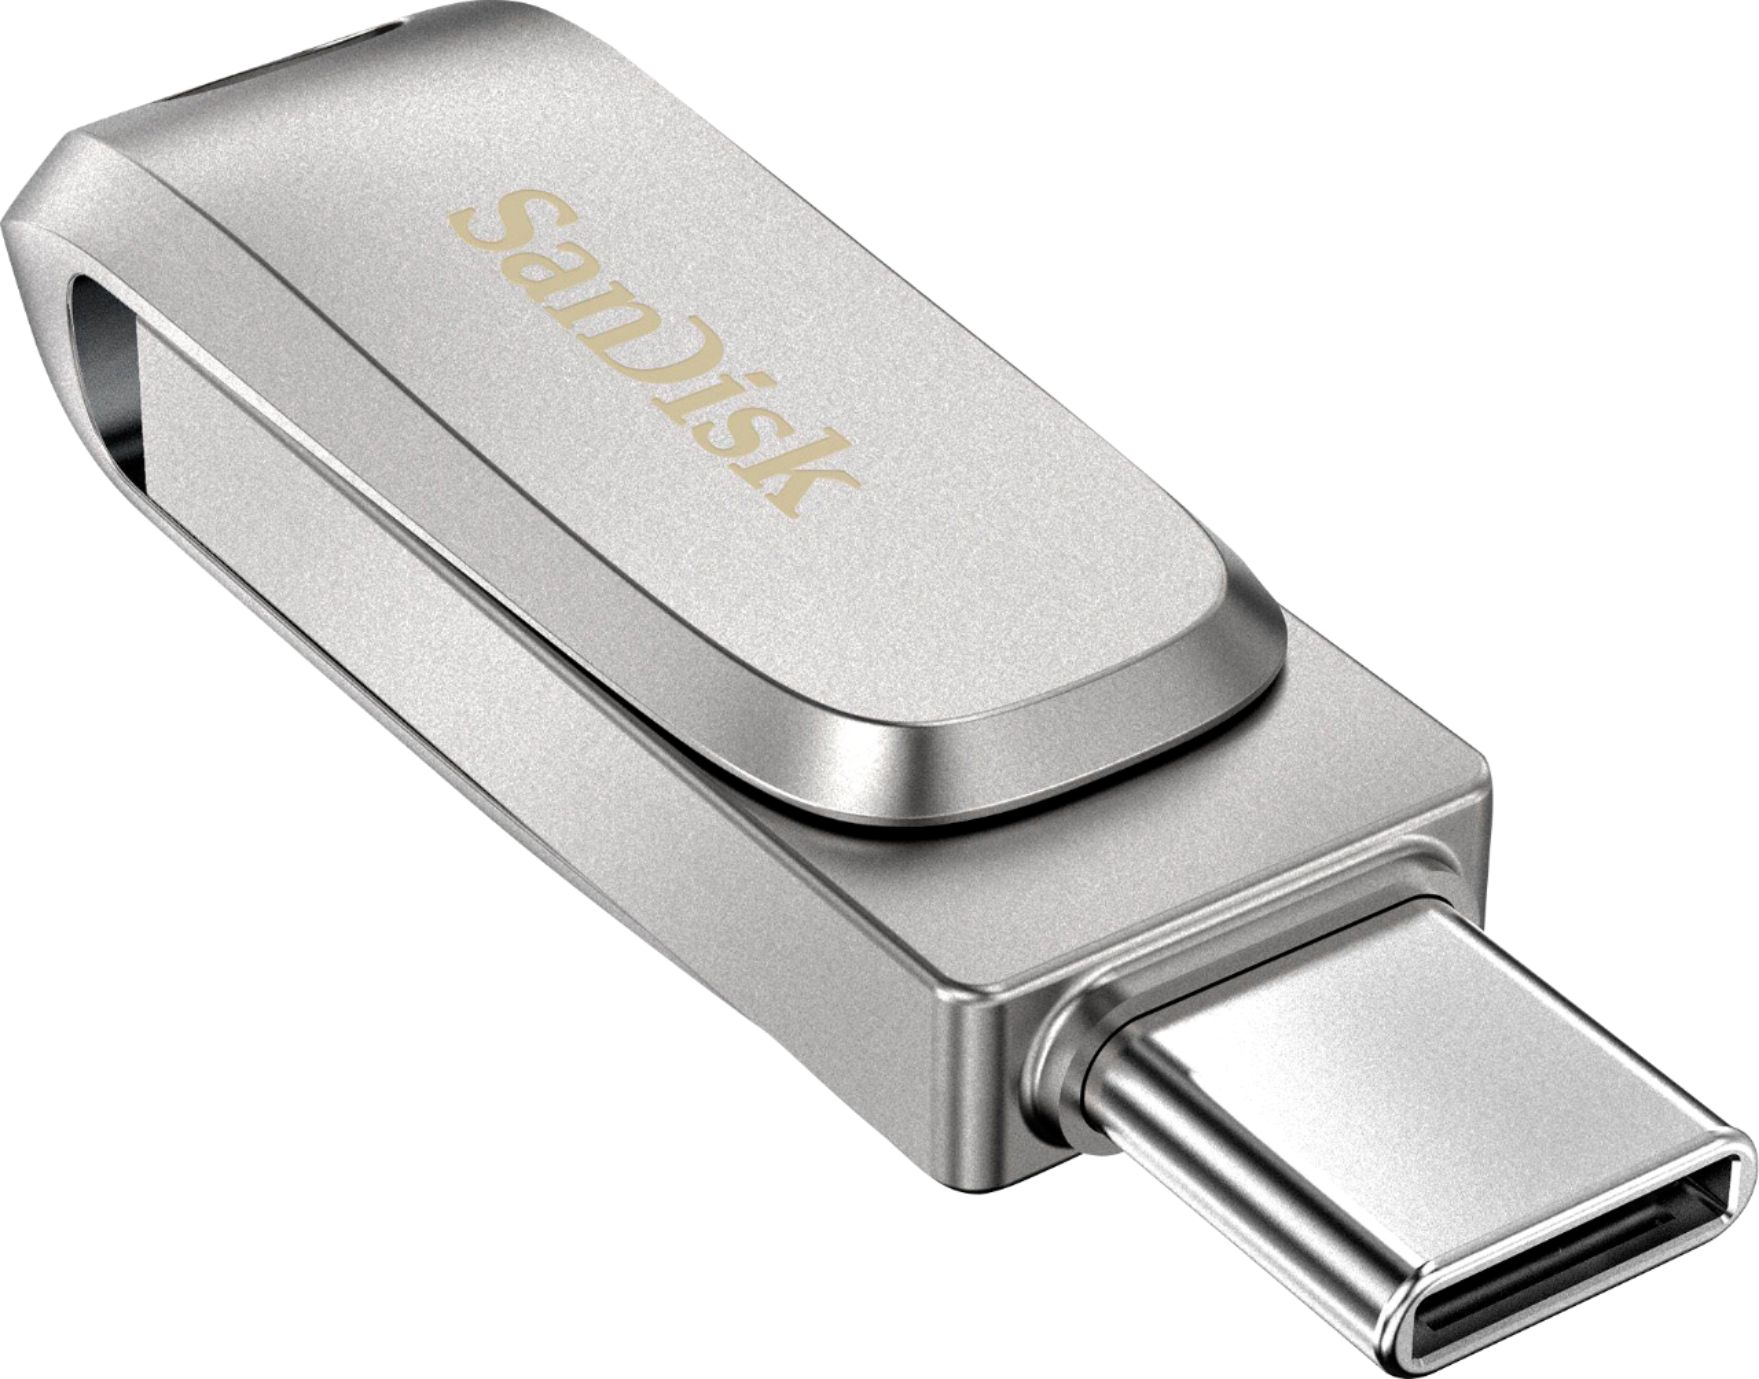 SanDisk Ultra Dual Drive Luxe 64GB 3.1, Type-C Flash Drive Silver SDDDC4-064G-A46 - Best Buy